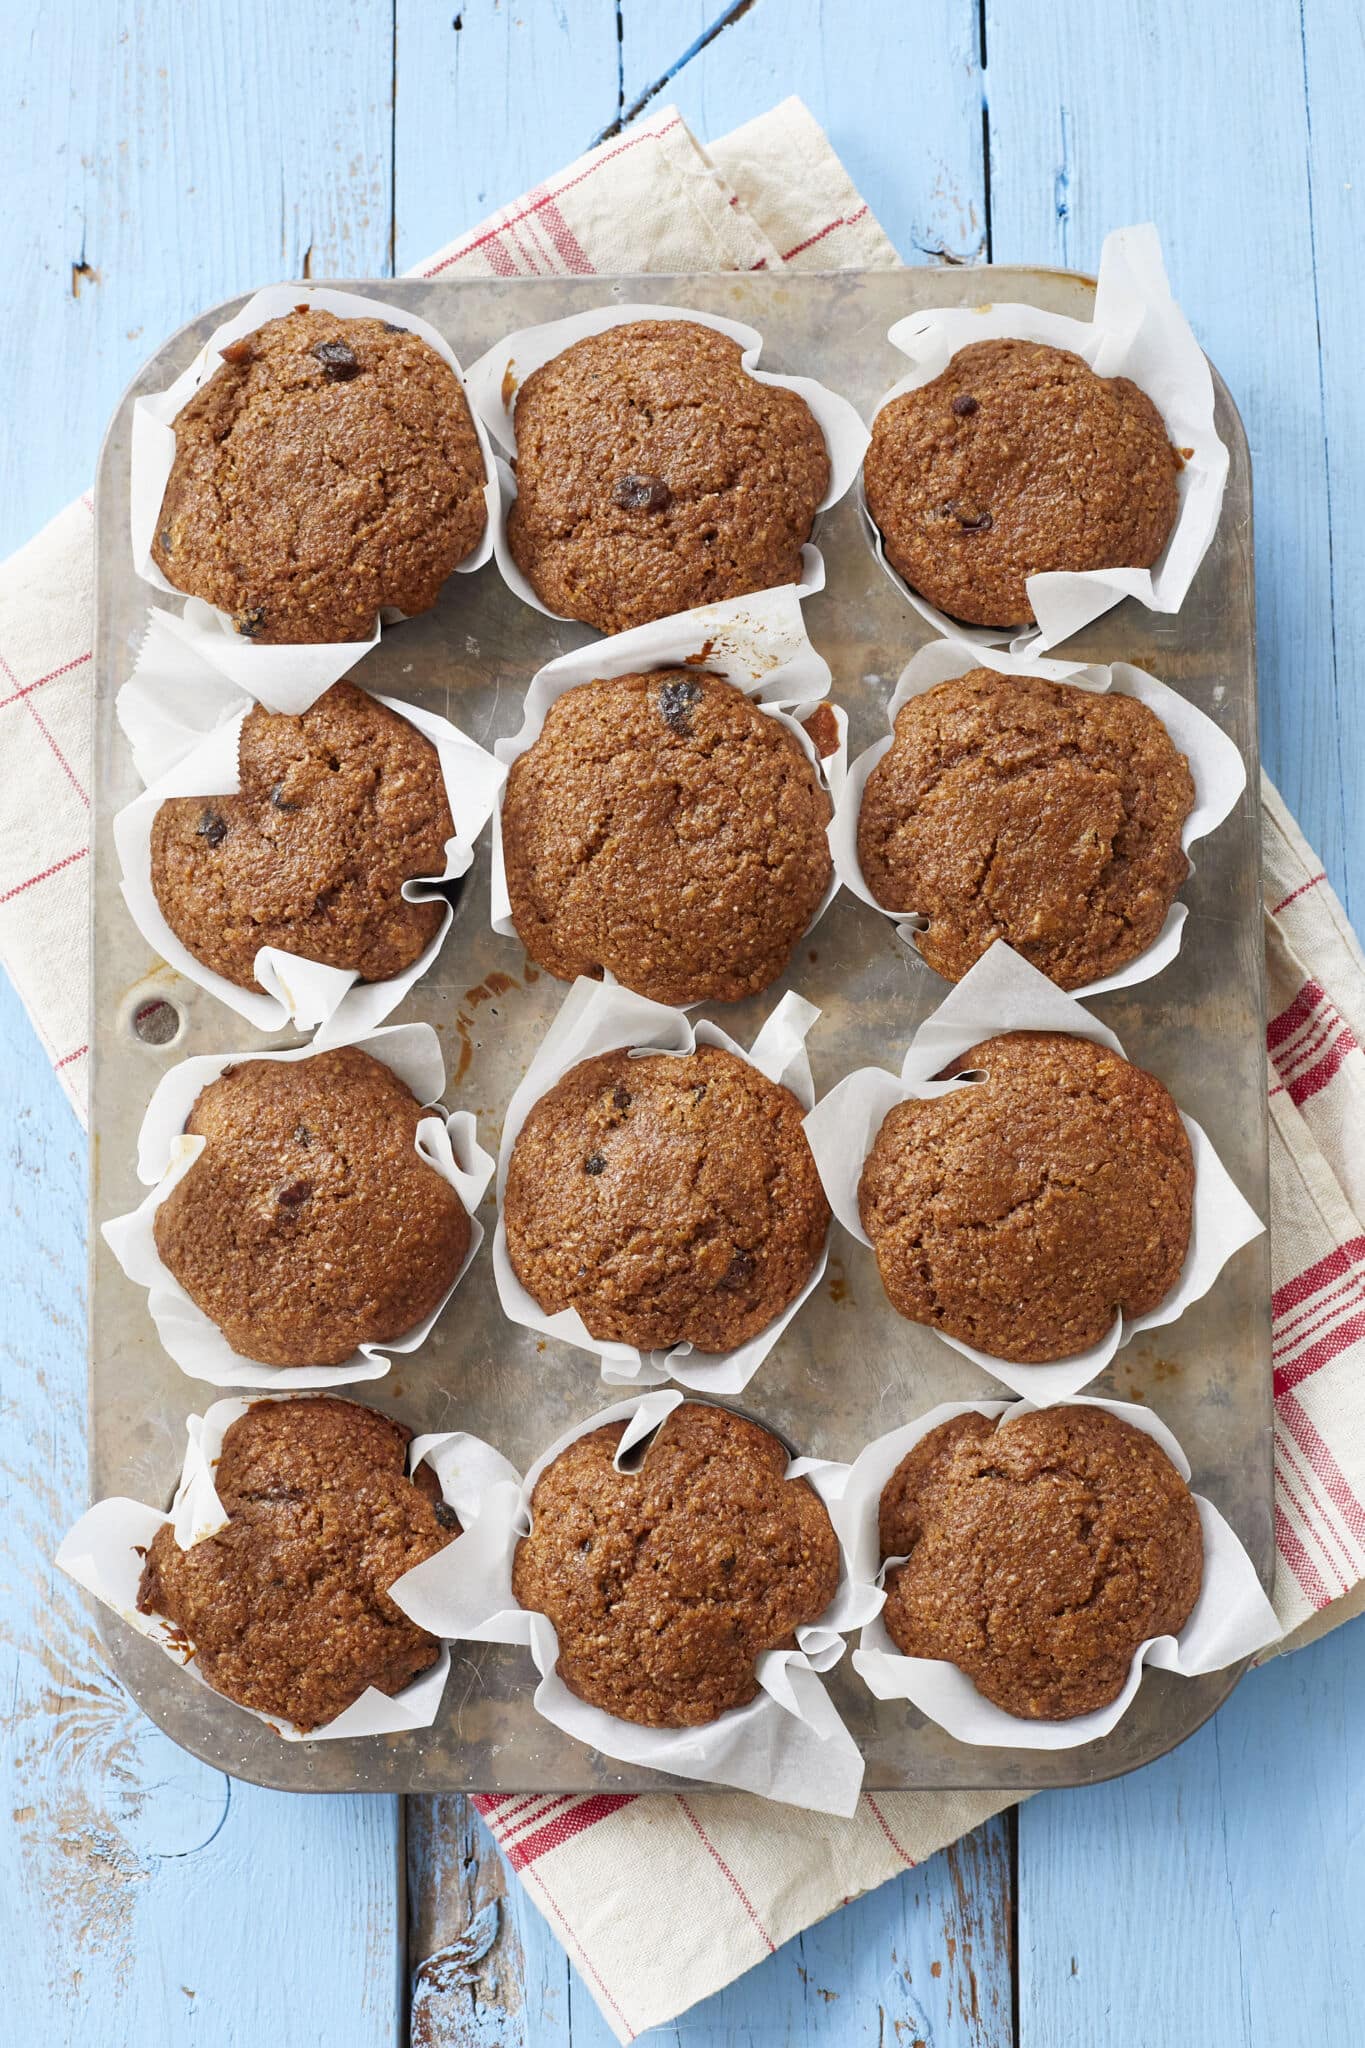 Healthy Bran Muffins are baked perfectly in liners in the muffin tin. They look moist, soft and packed with raisins. 